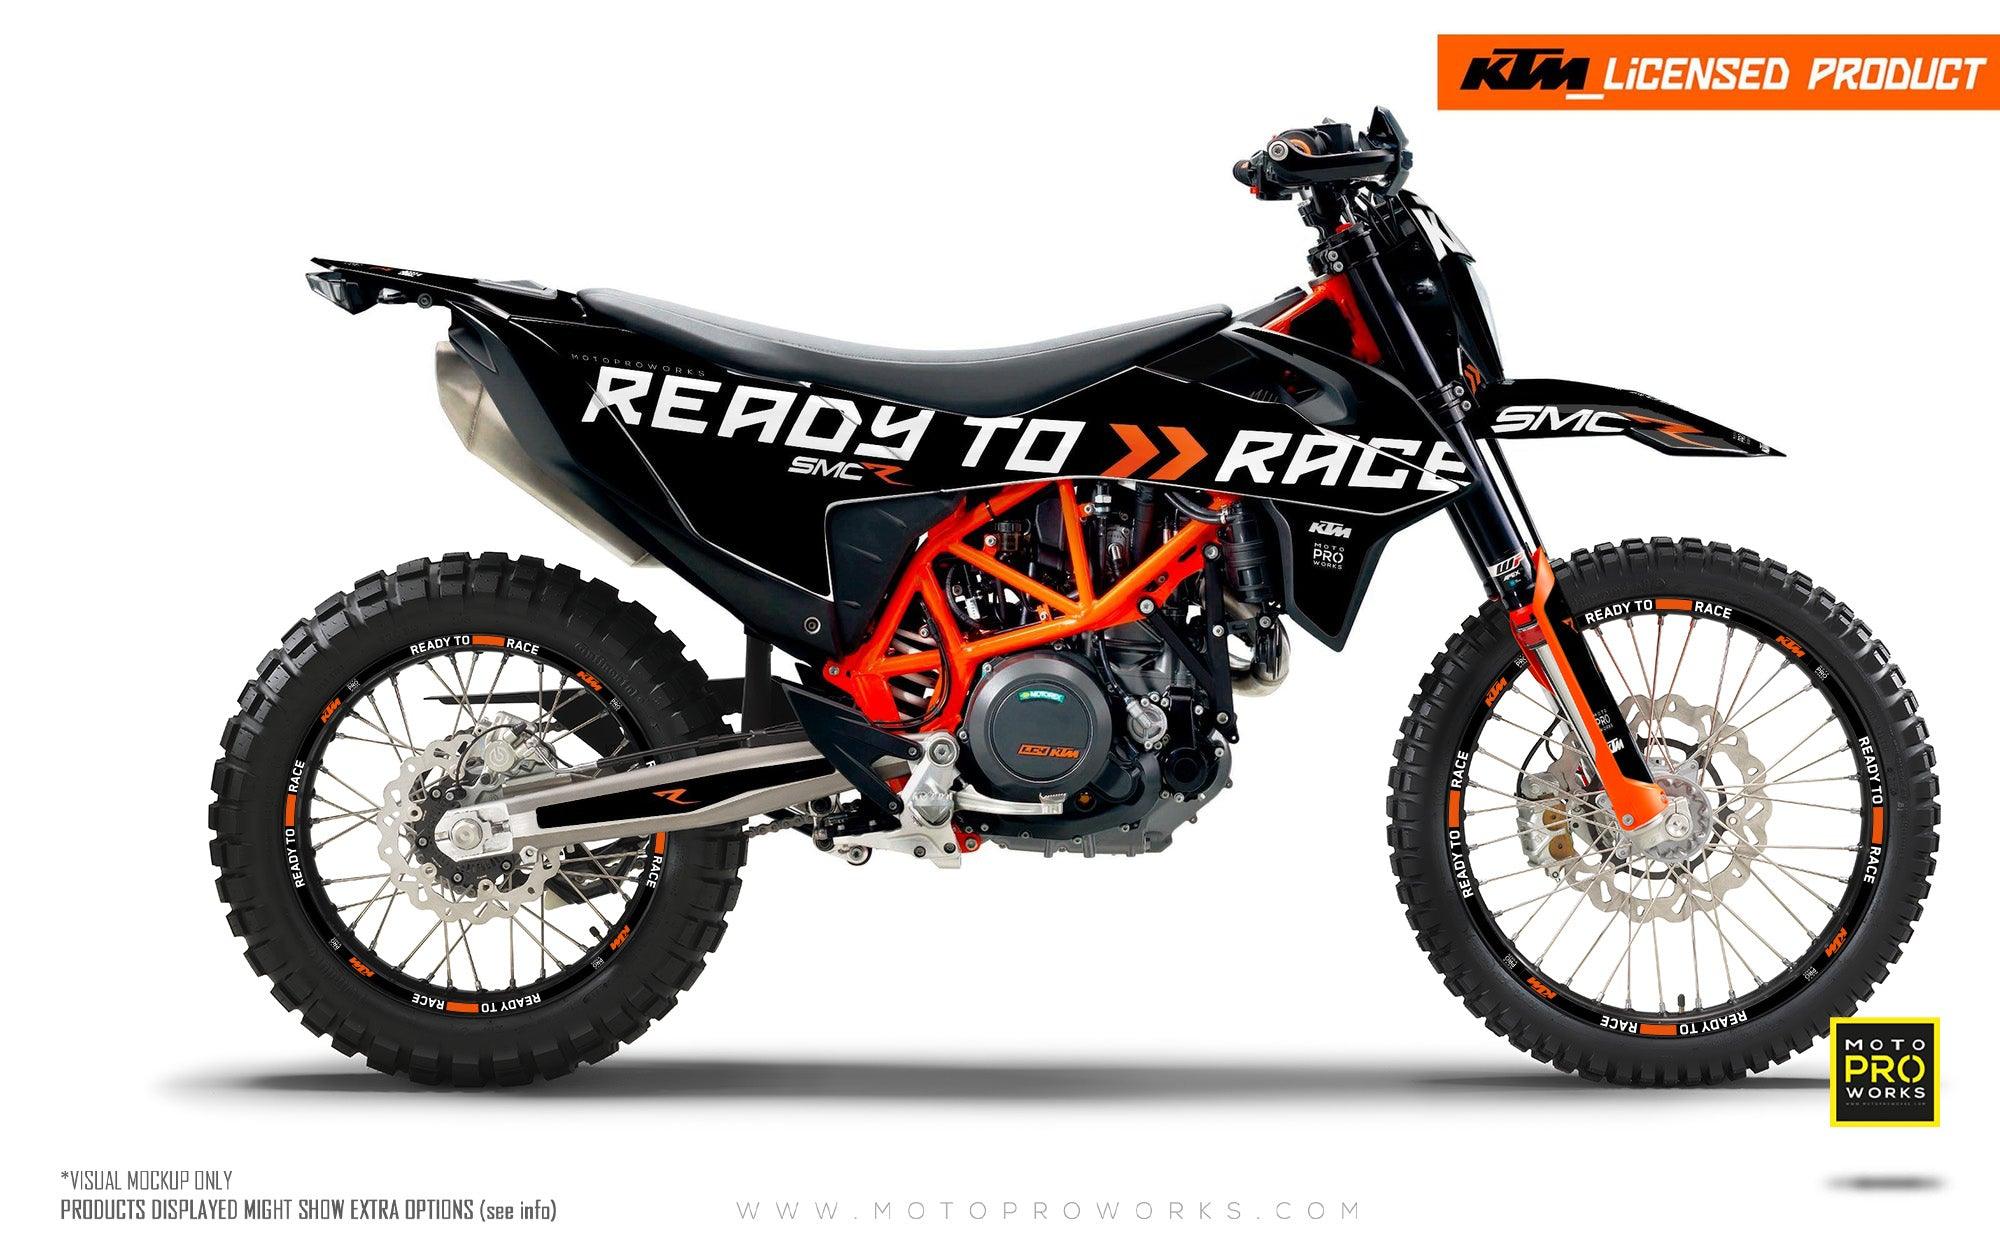 KTM GRAPHIC KIT - 690 SMC-R "Ready2Race" (Black) - MotoProWorks | Decals and Bike Graphic kit